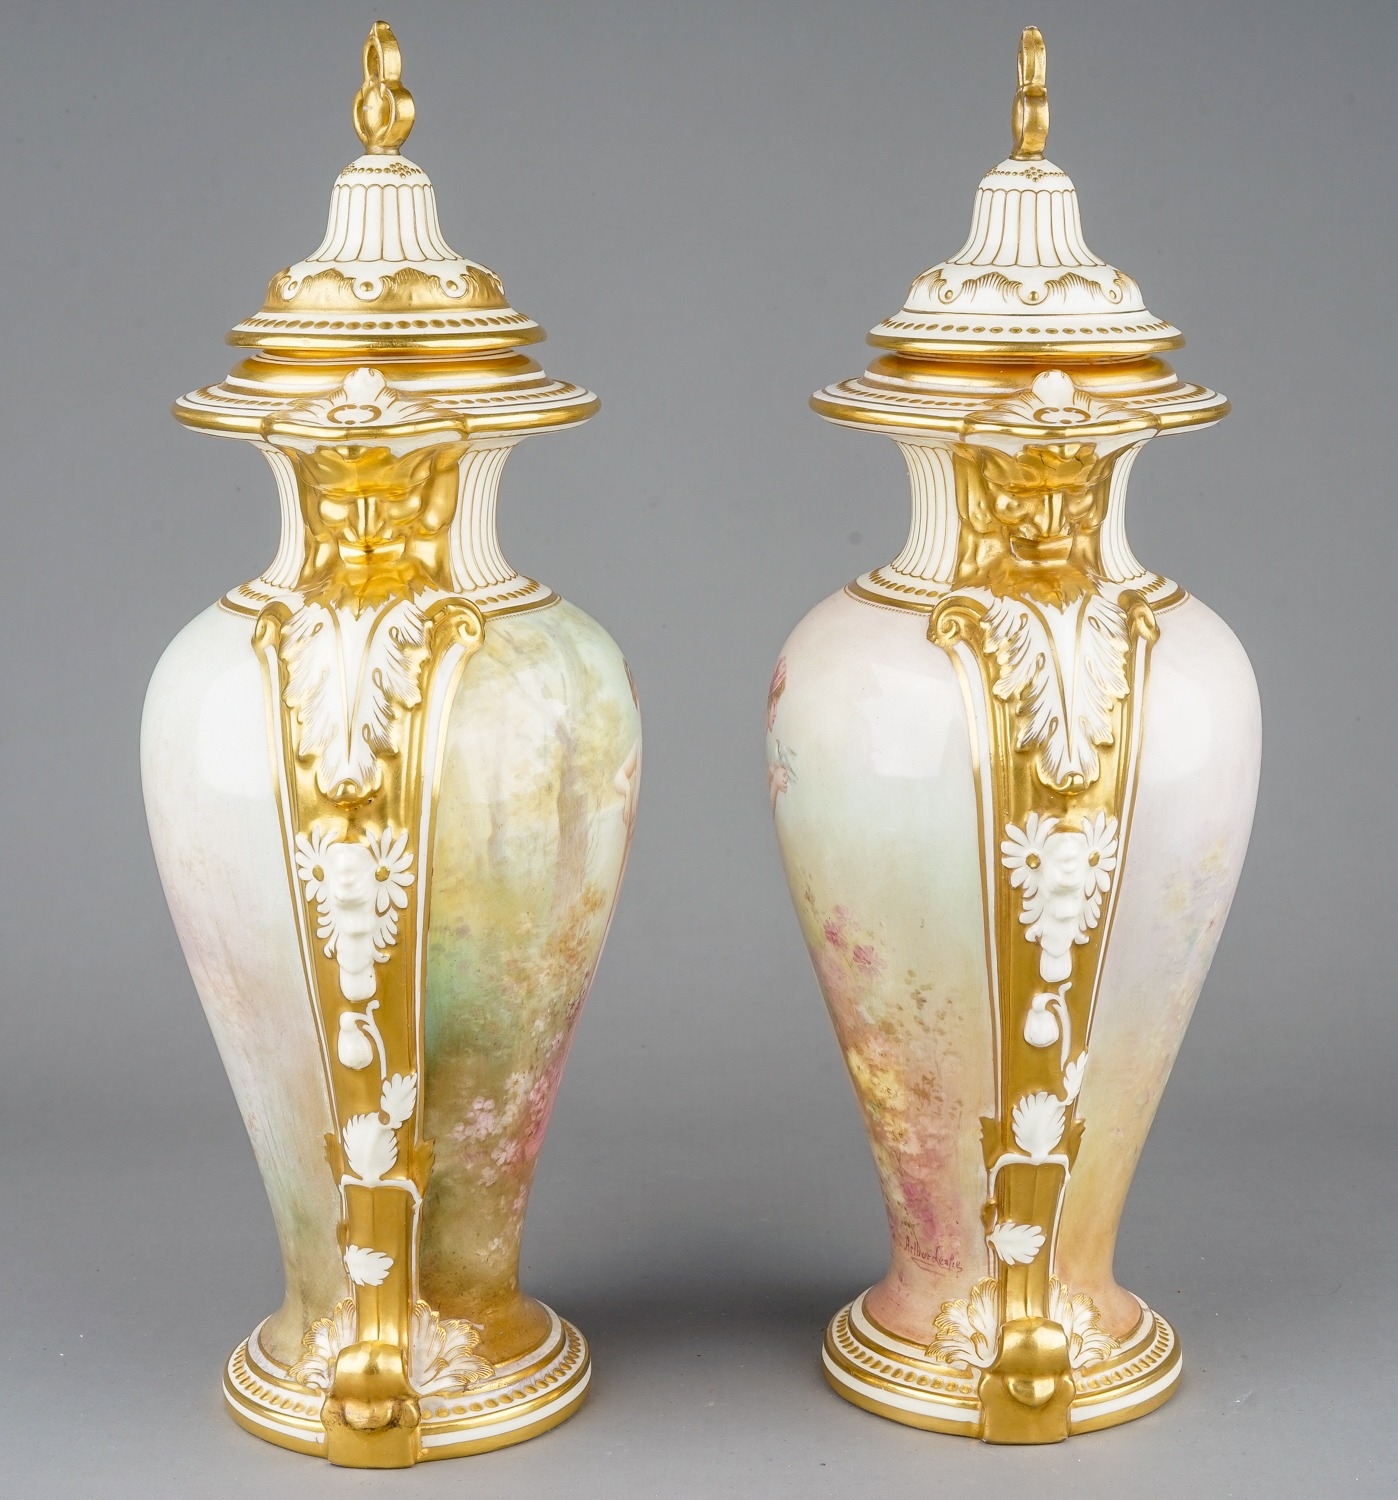 Arthur Leslie: a pair of early 20th Century Royal Doulton vases and covers, urn shaped bodies - Image 2 of 7